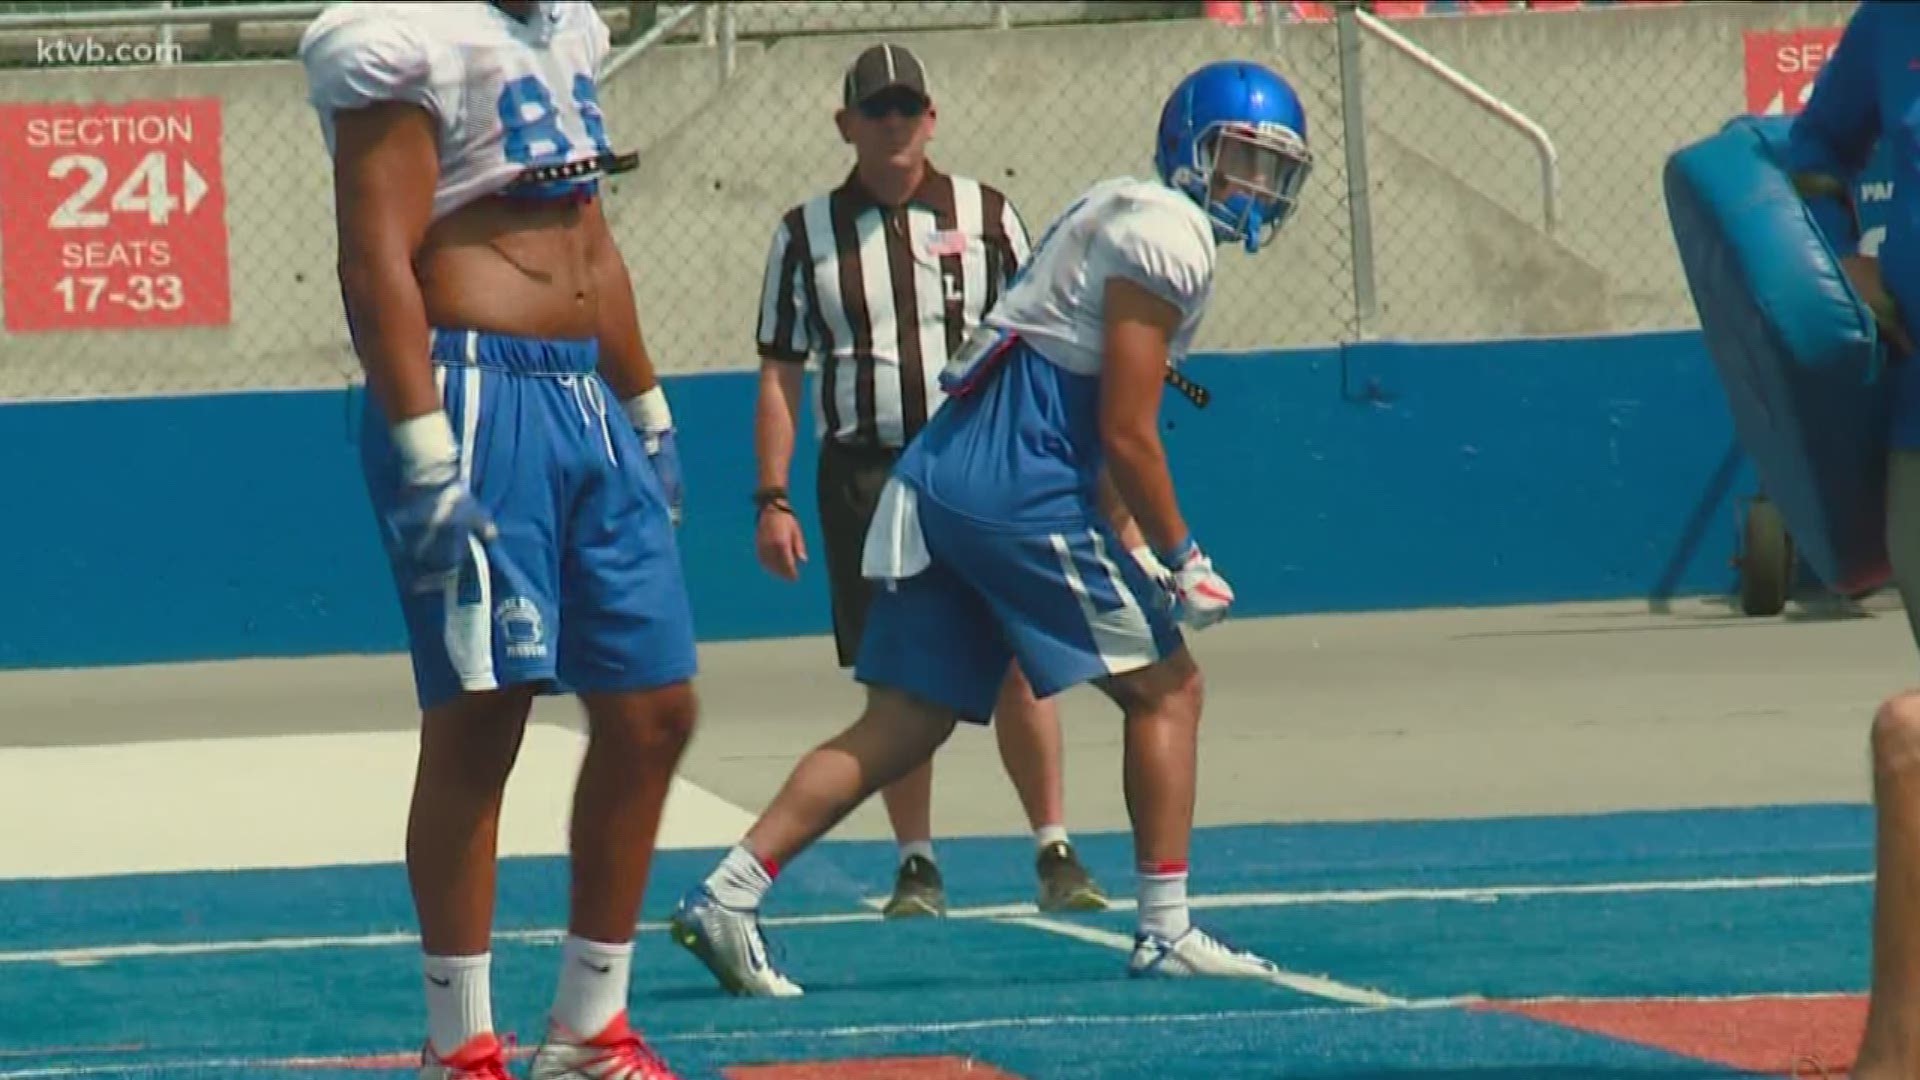 Boise State receiver Sean Modster is looking to improve on last season, when he caught a career-high 32 passes.